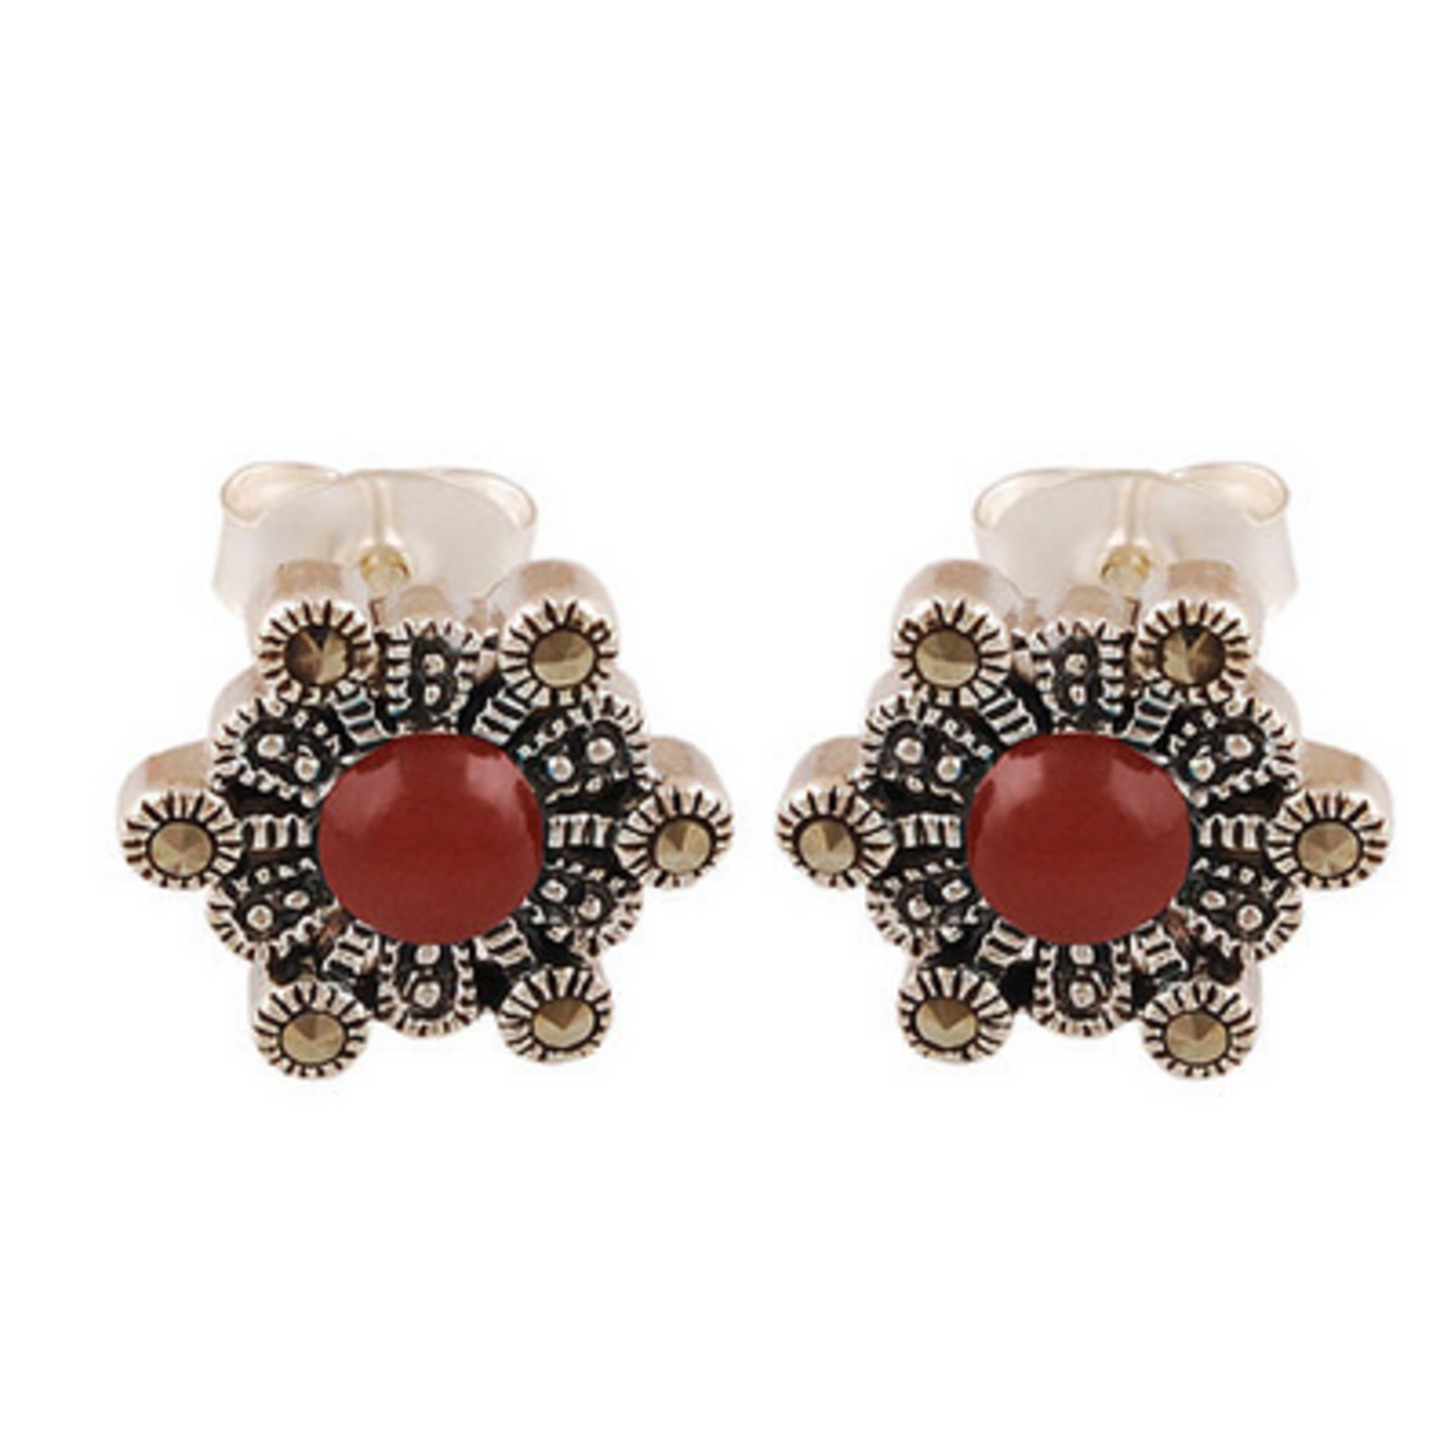 The Hexad Marcasite Silver Studs